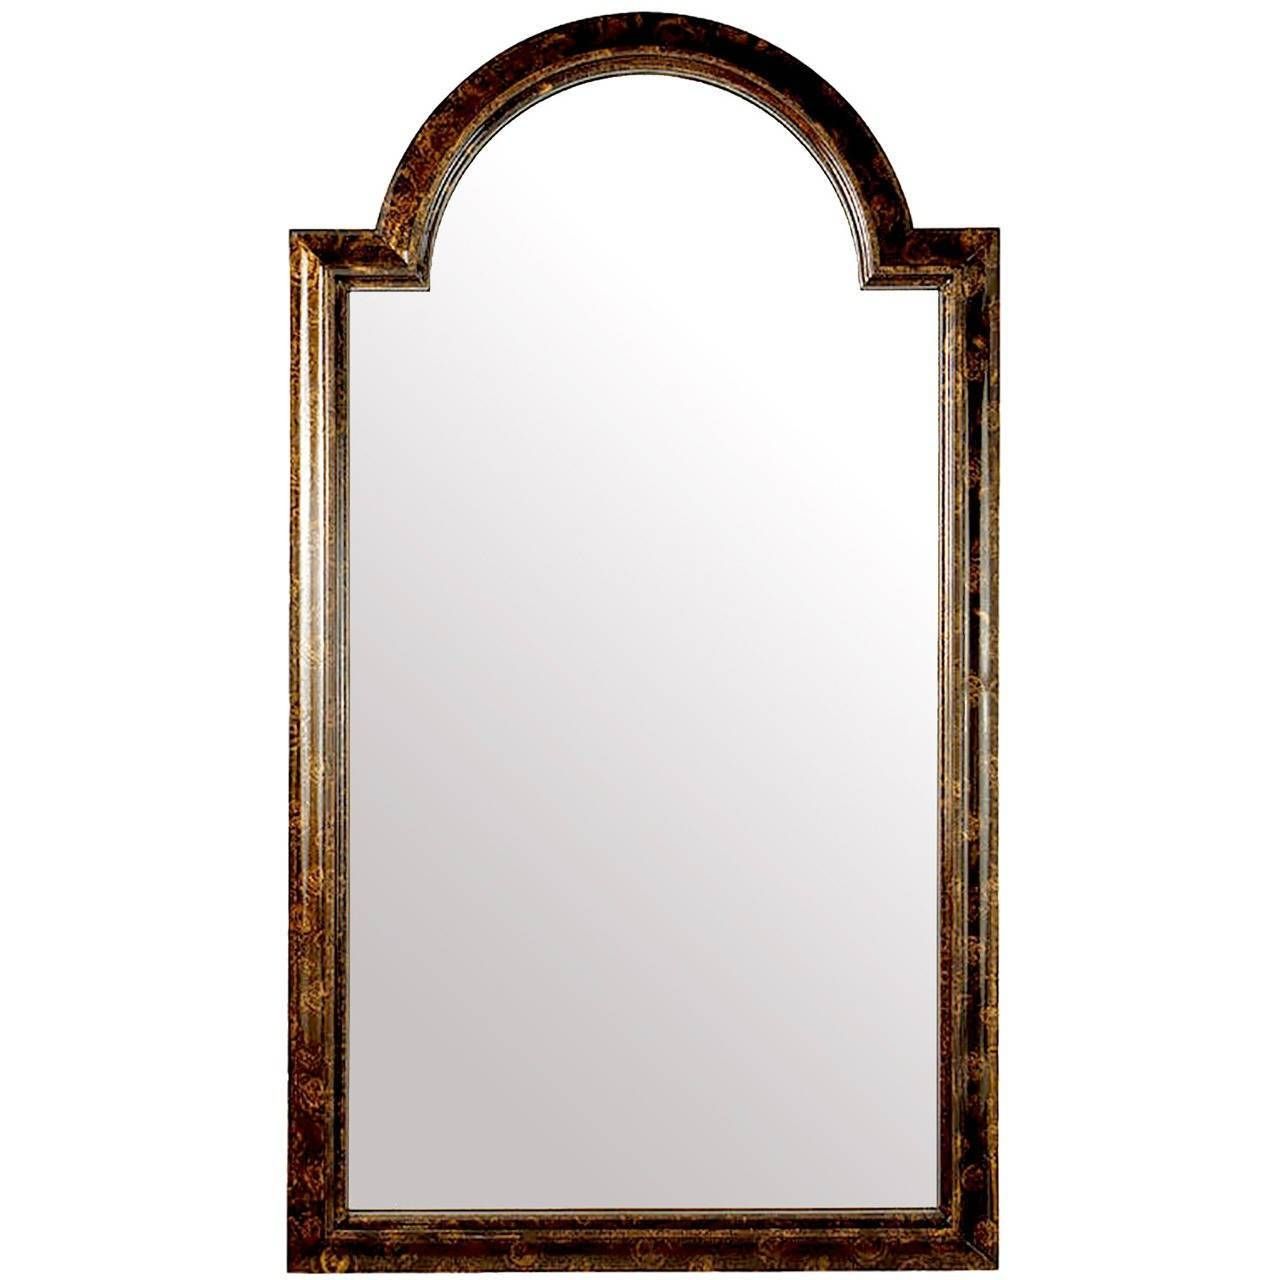 Labarge Palladian Arch Top Mirror In Faux Tortoise Finish At 1stdibs Within Curved Top Mirrors (View 1 of 15)